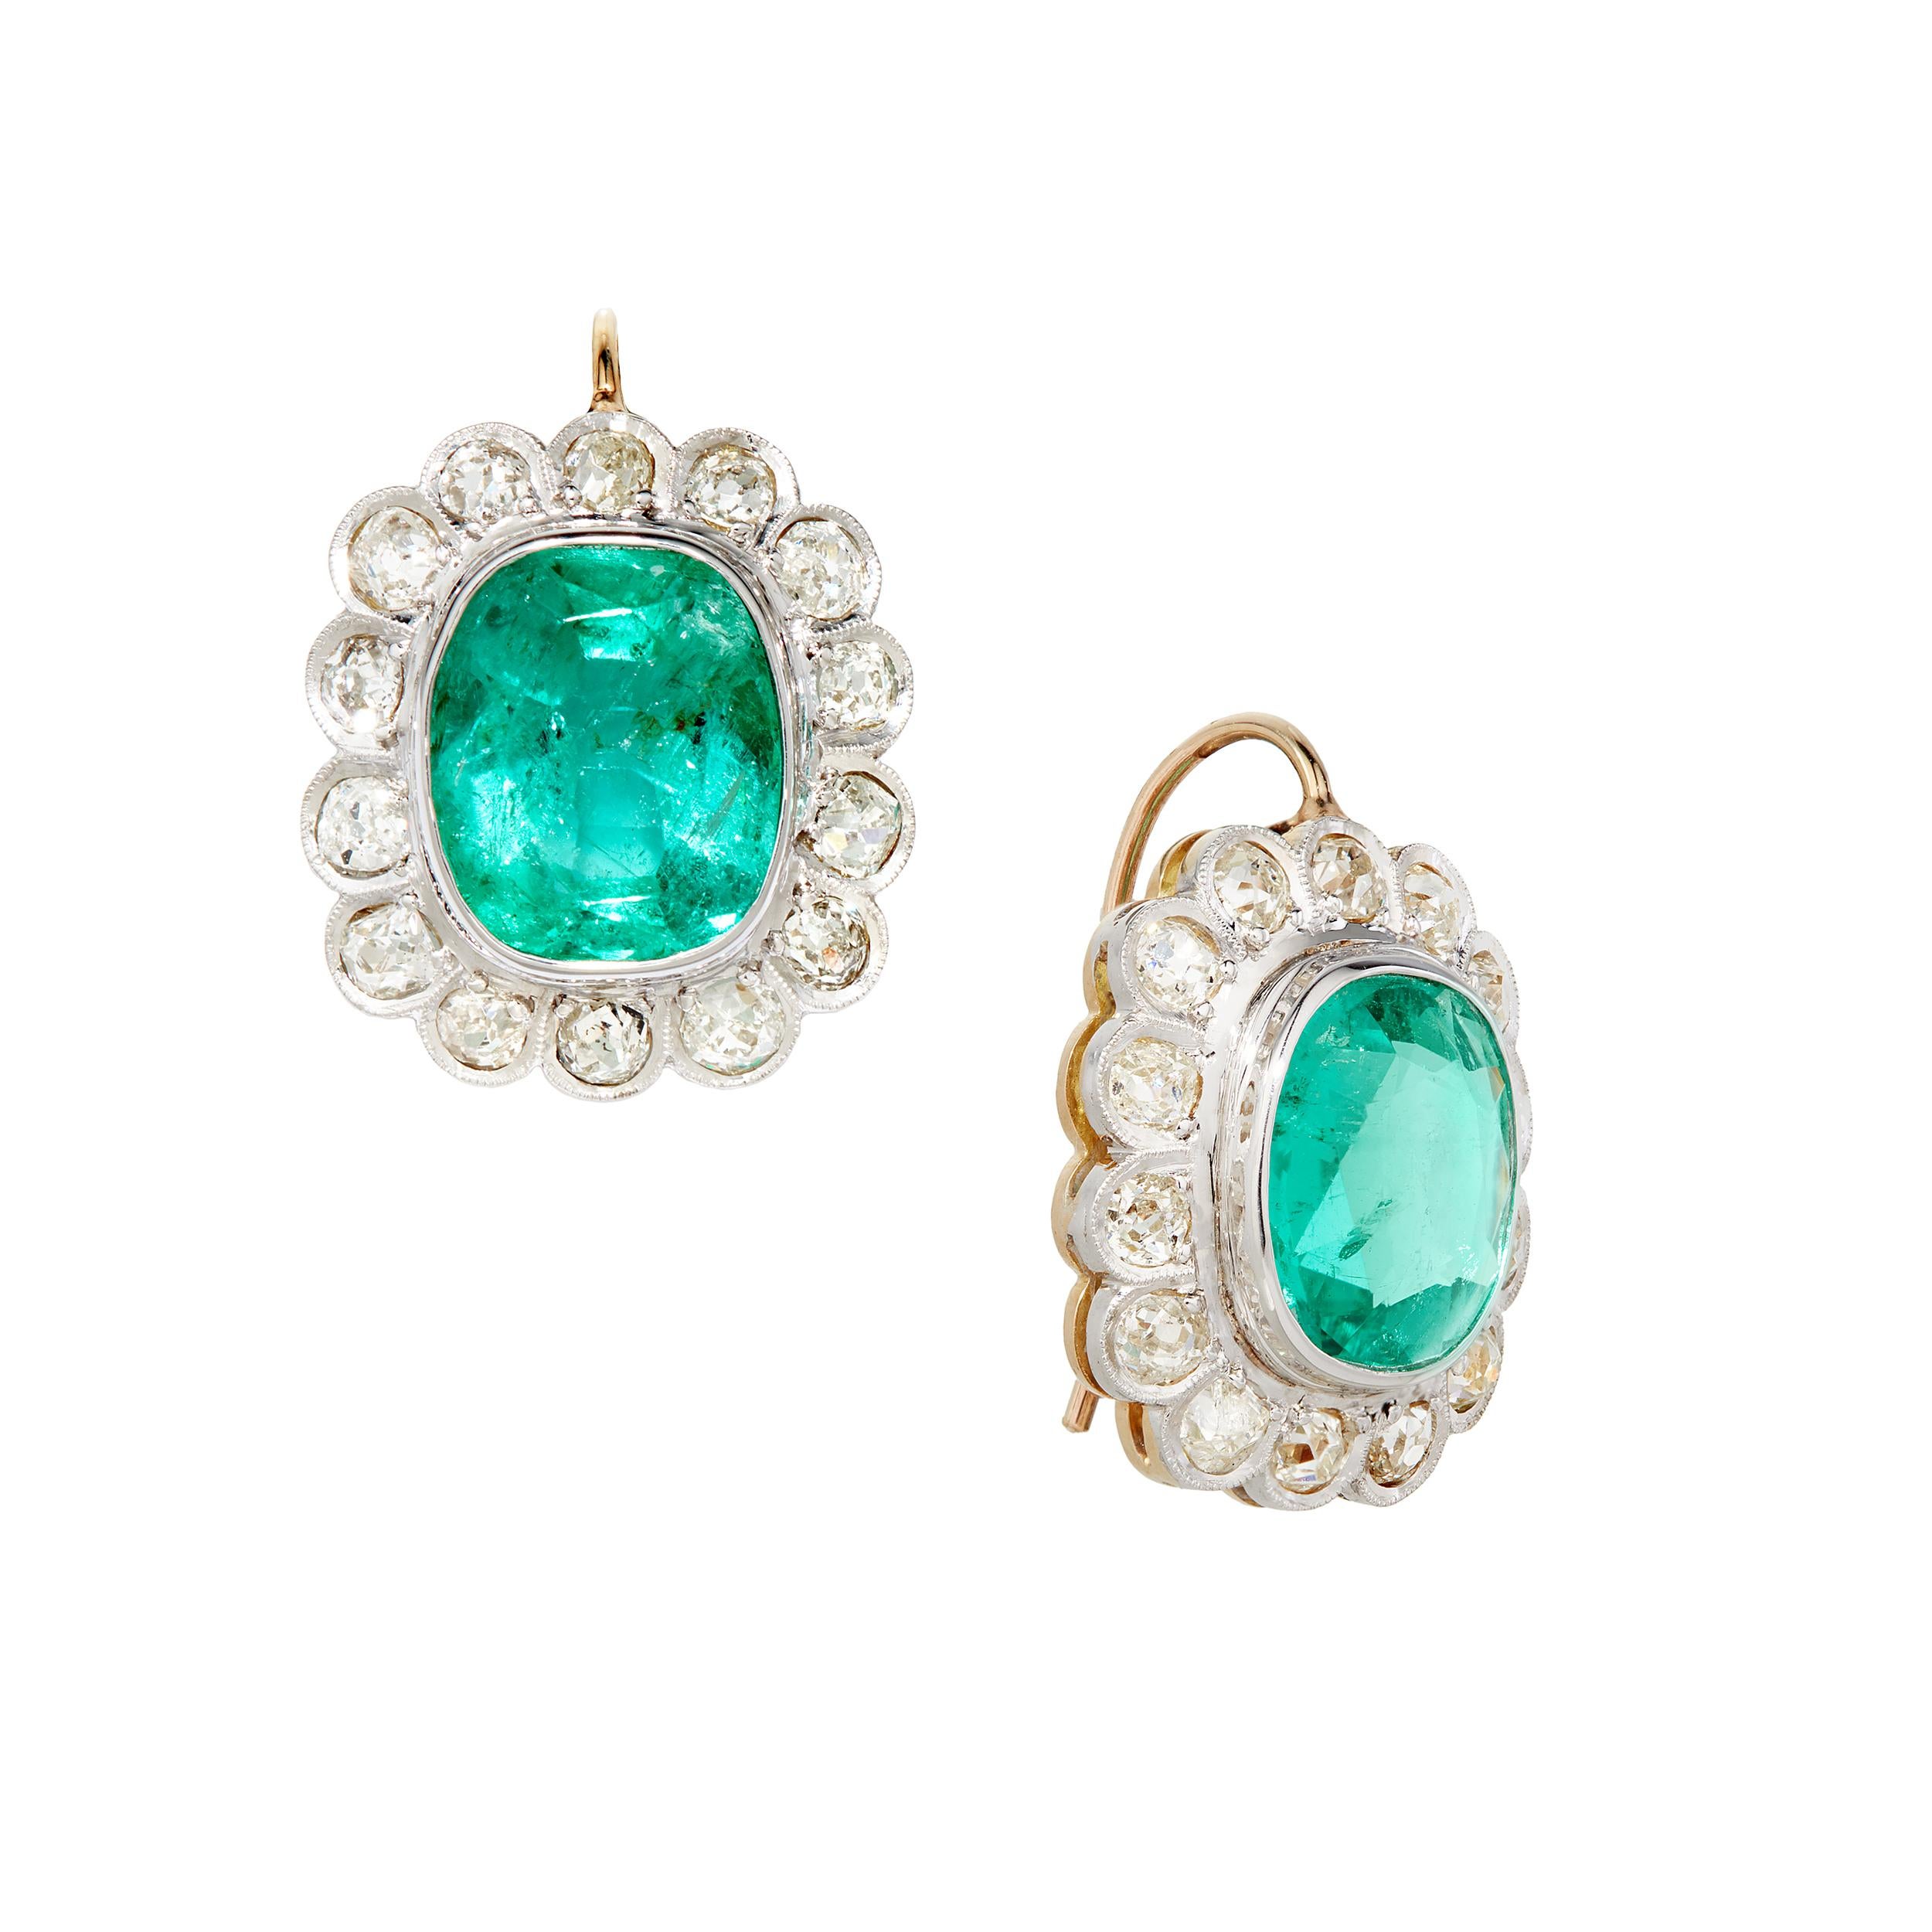 Gorgeous Colombian Emerald Earrings set in 18K Yellow Gold and Platinum.

Earring Details:

2 Colombian Cushion Cut Emeralds Weighing Approximately:  4.7 Carats 
28 Round Brilliant Diamonds Weighing Approximately:  1.40 Carats

Total Gem Weight